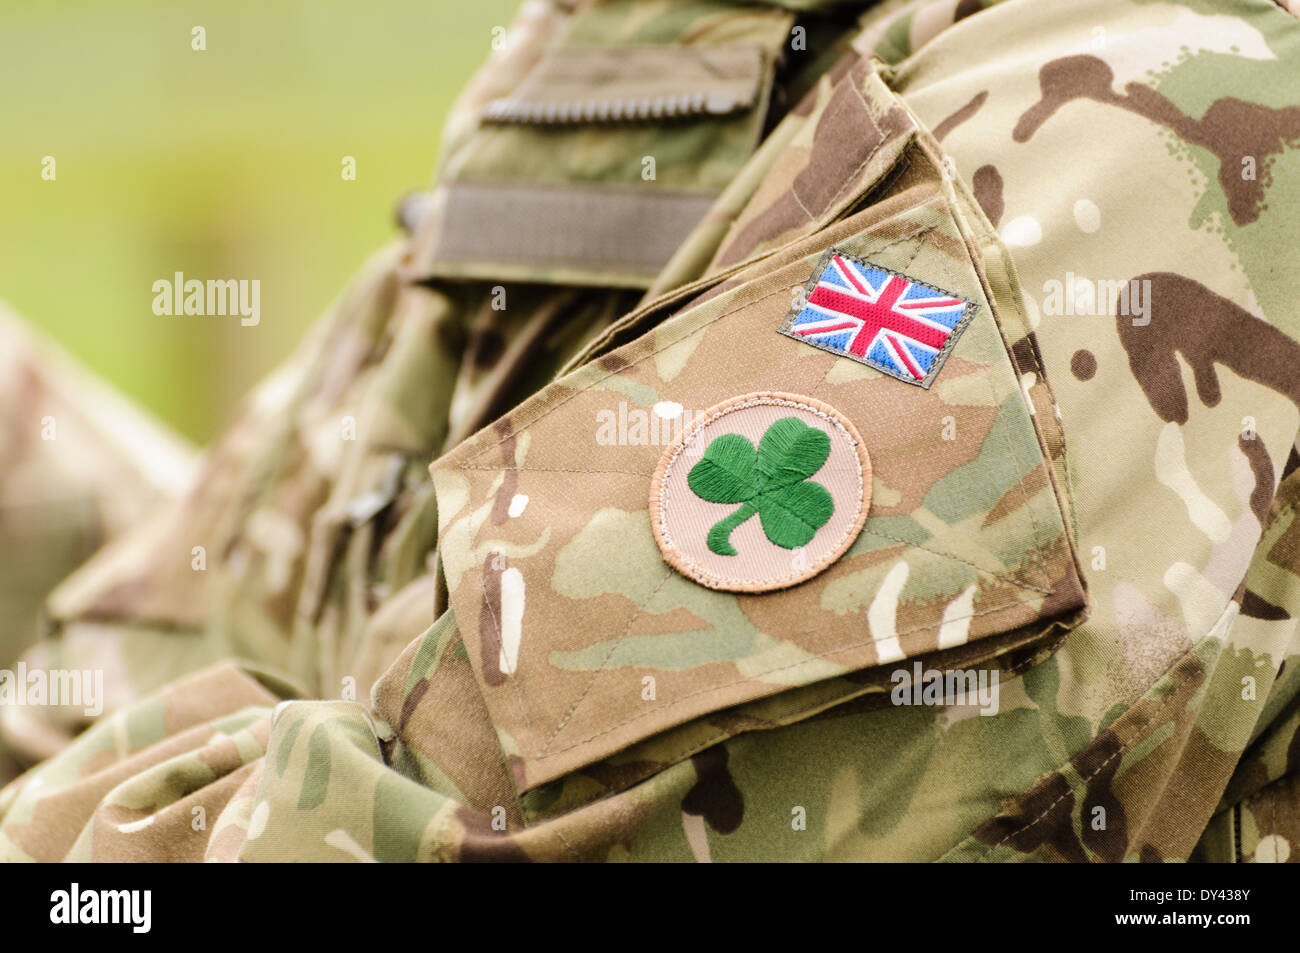 British army soldier camoflagued uniform Stock Photo